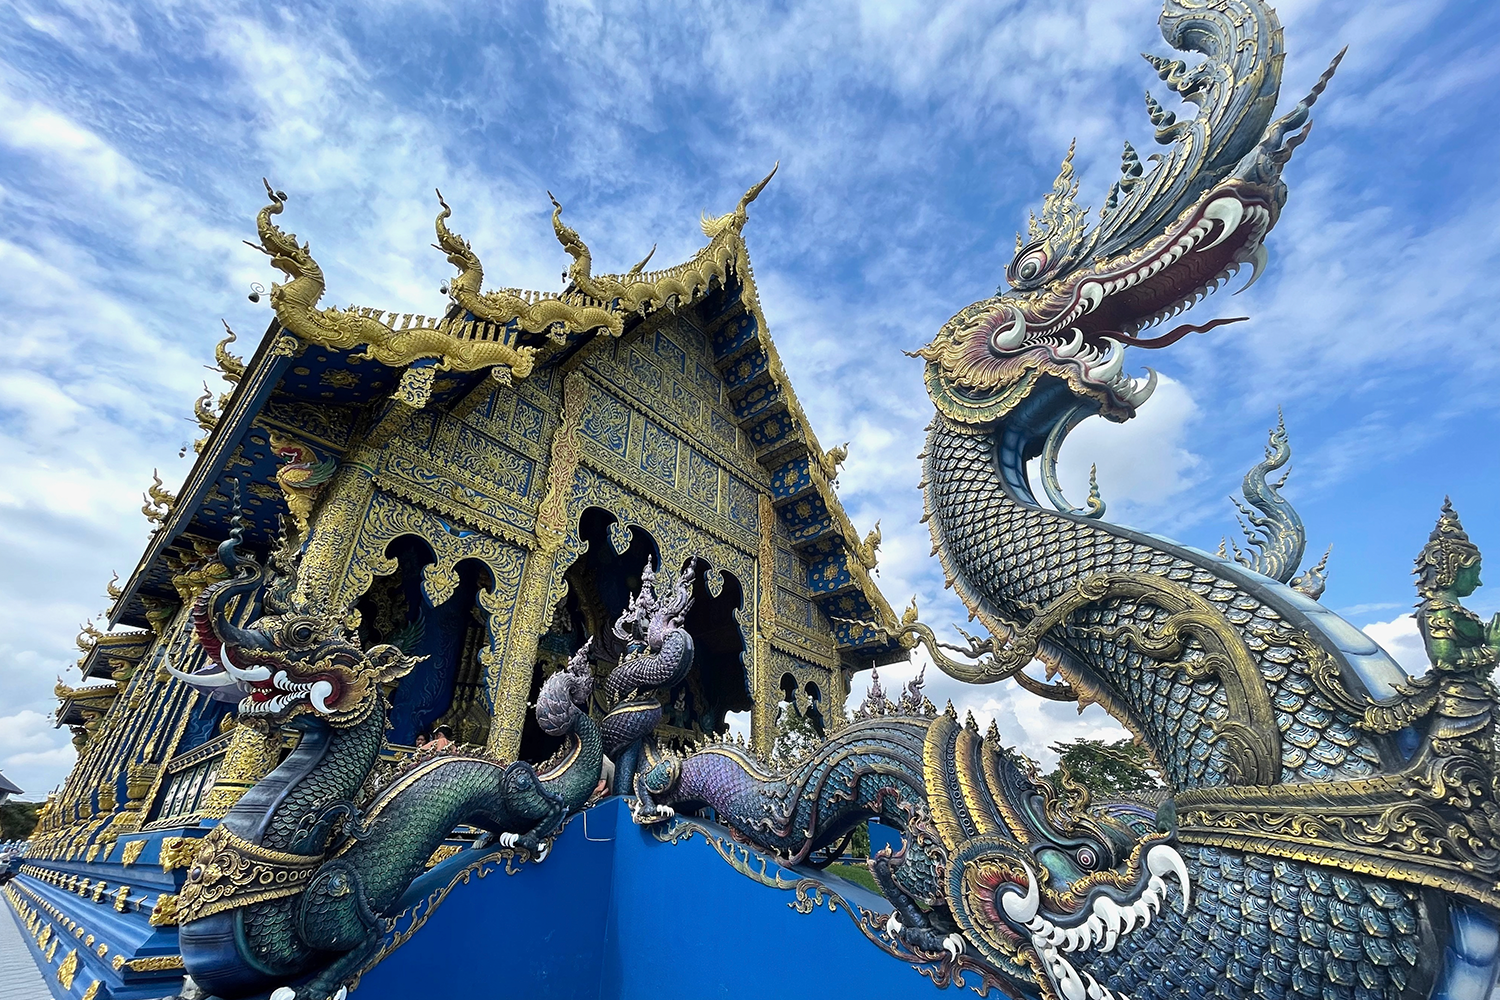 The striking exteriors of the blue temple at Chiang Rai